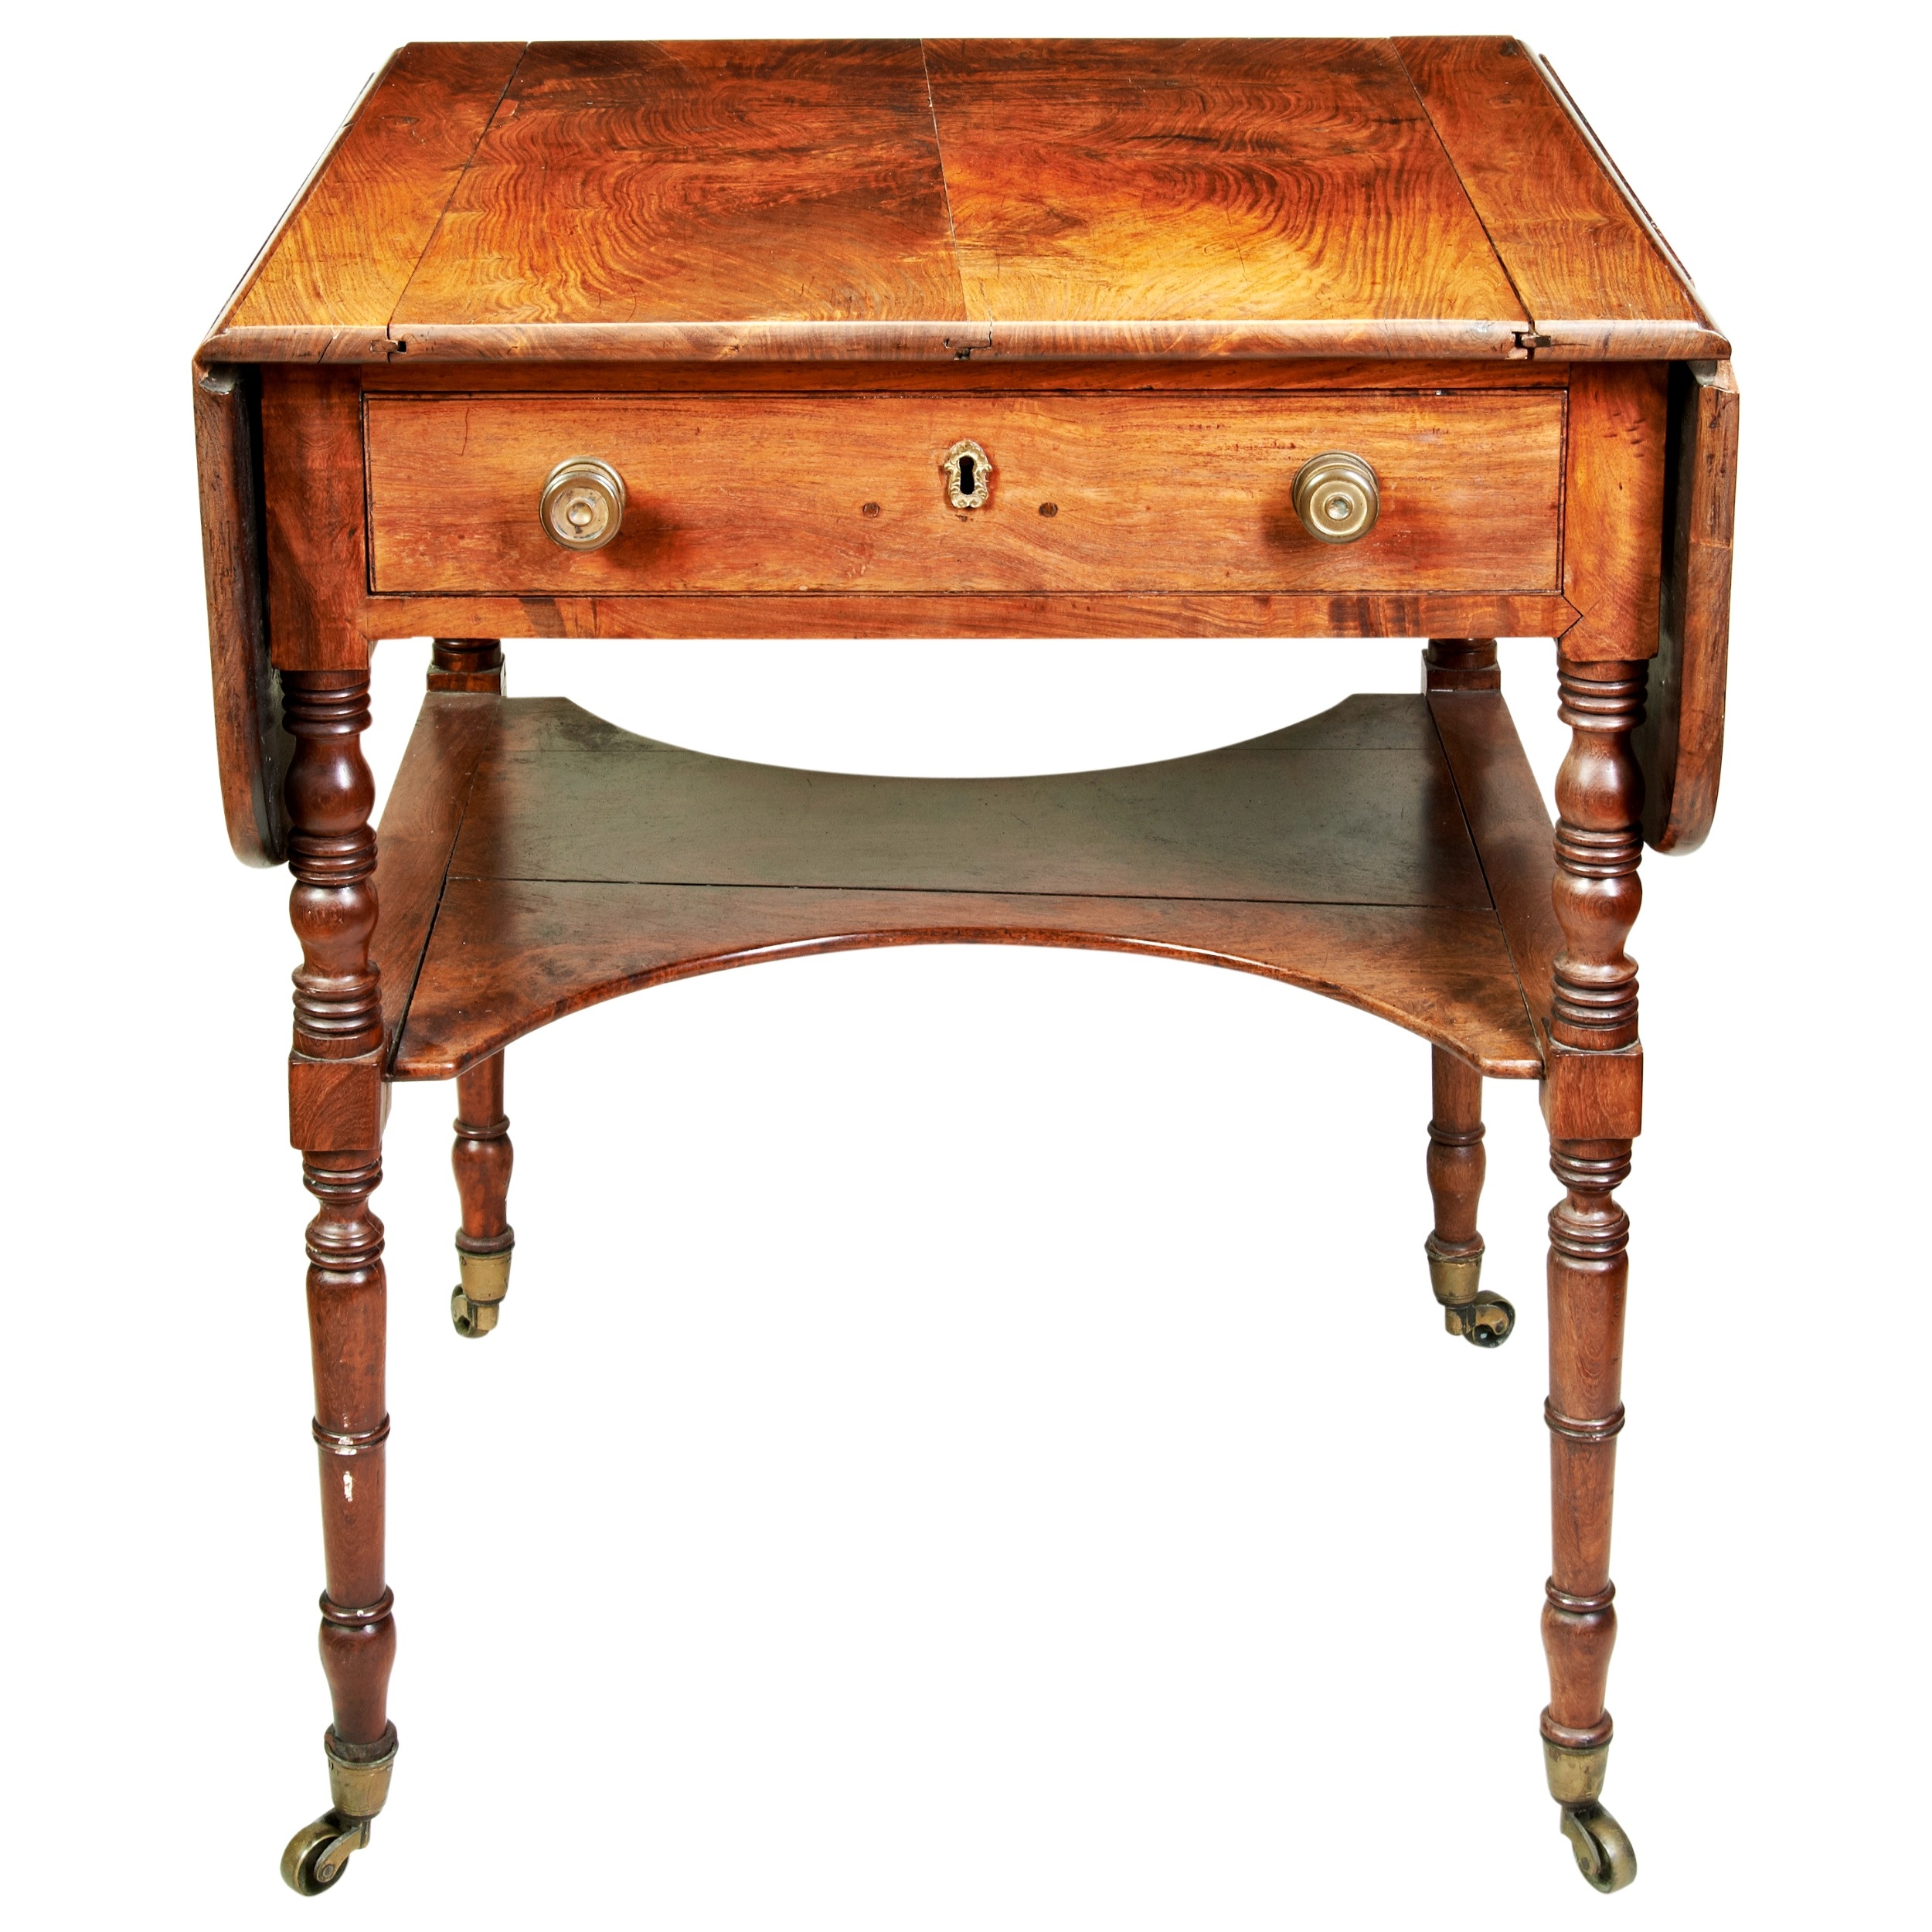 A RARE ANGLO CHINESE HARDWOOD AND PARQUETRY GAMES TABLE CIRCA 1820-1830 raised on slender turned